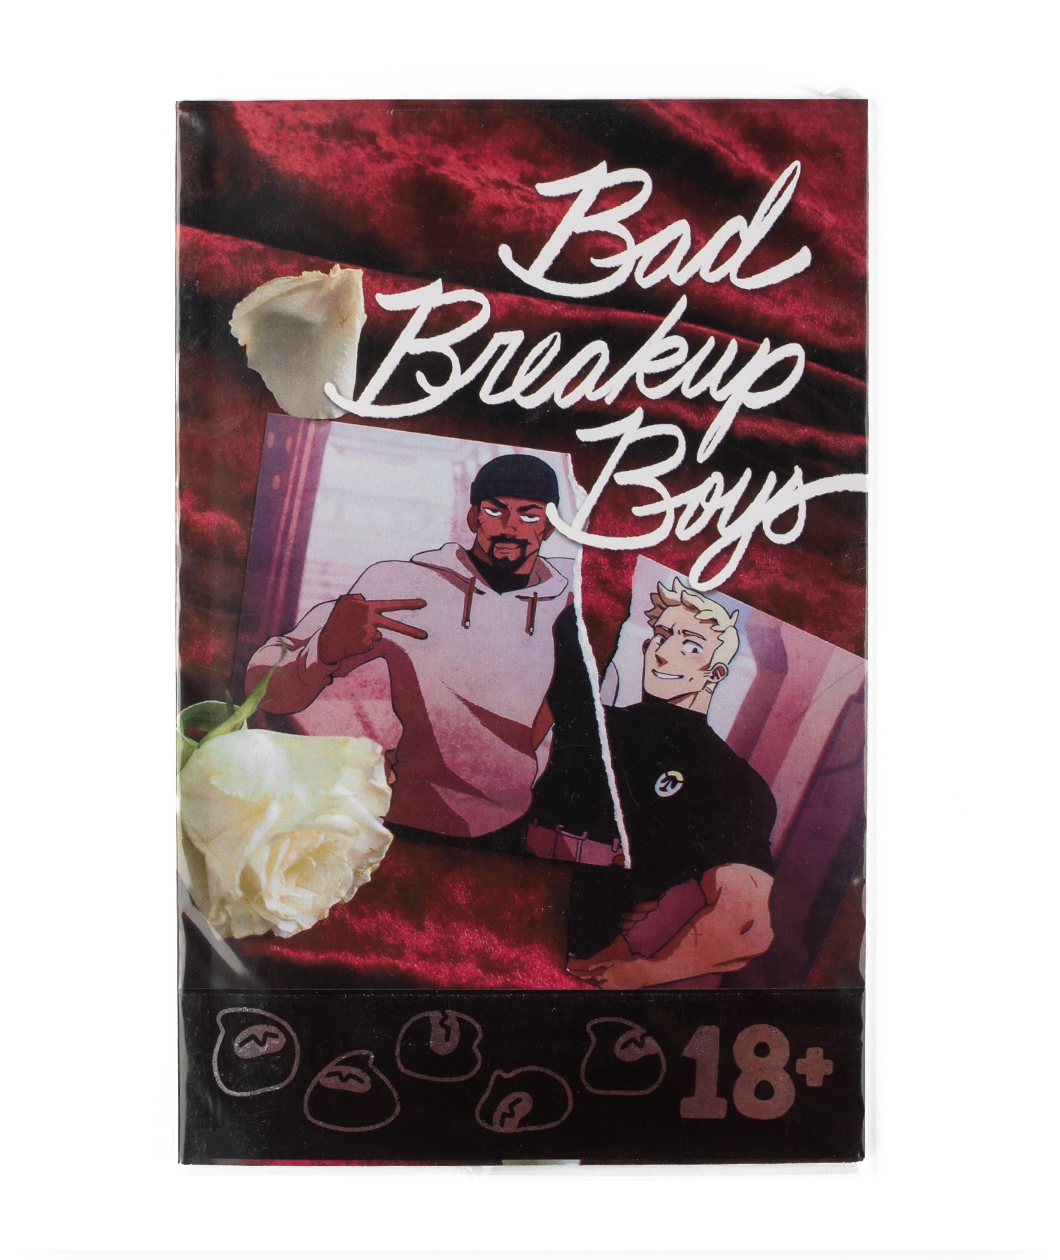 The cover of a Zine showing two pictures of men ripped up on a red velvet background with white roses. The text reads 